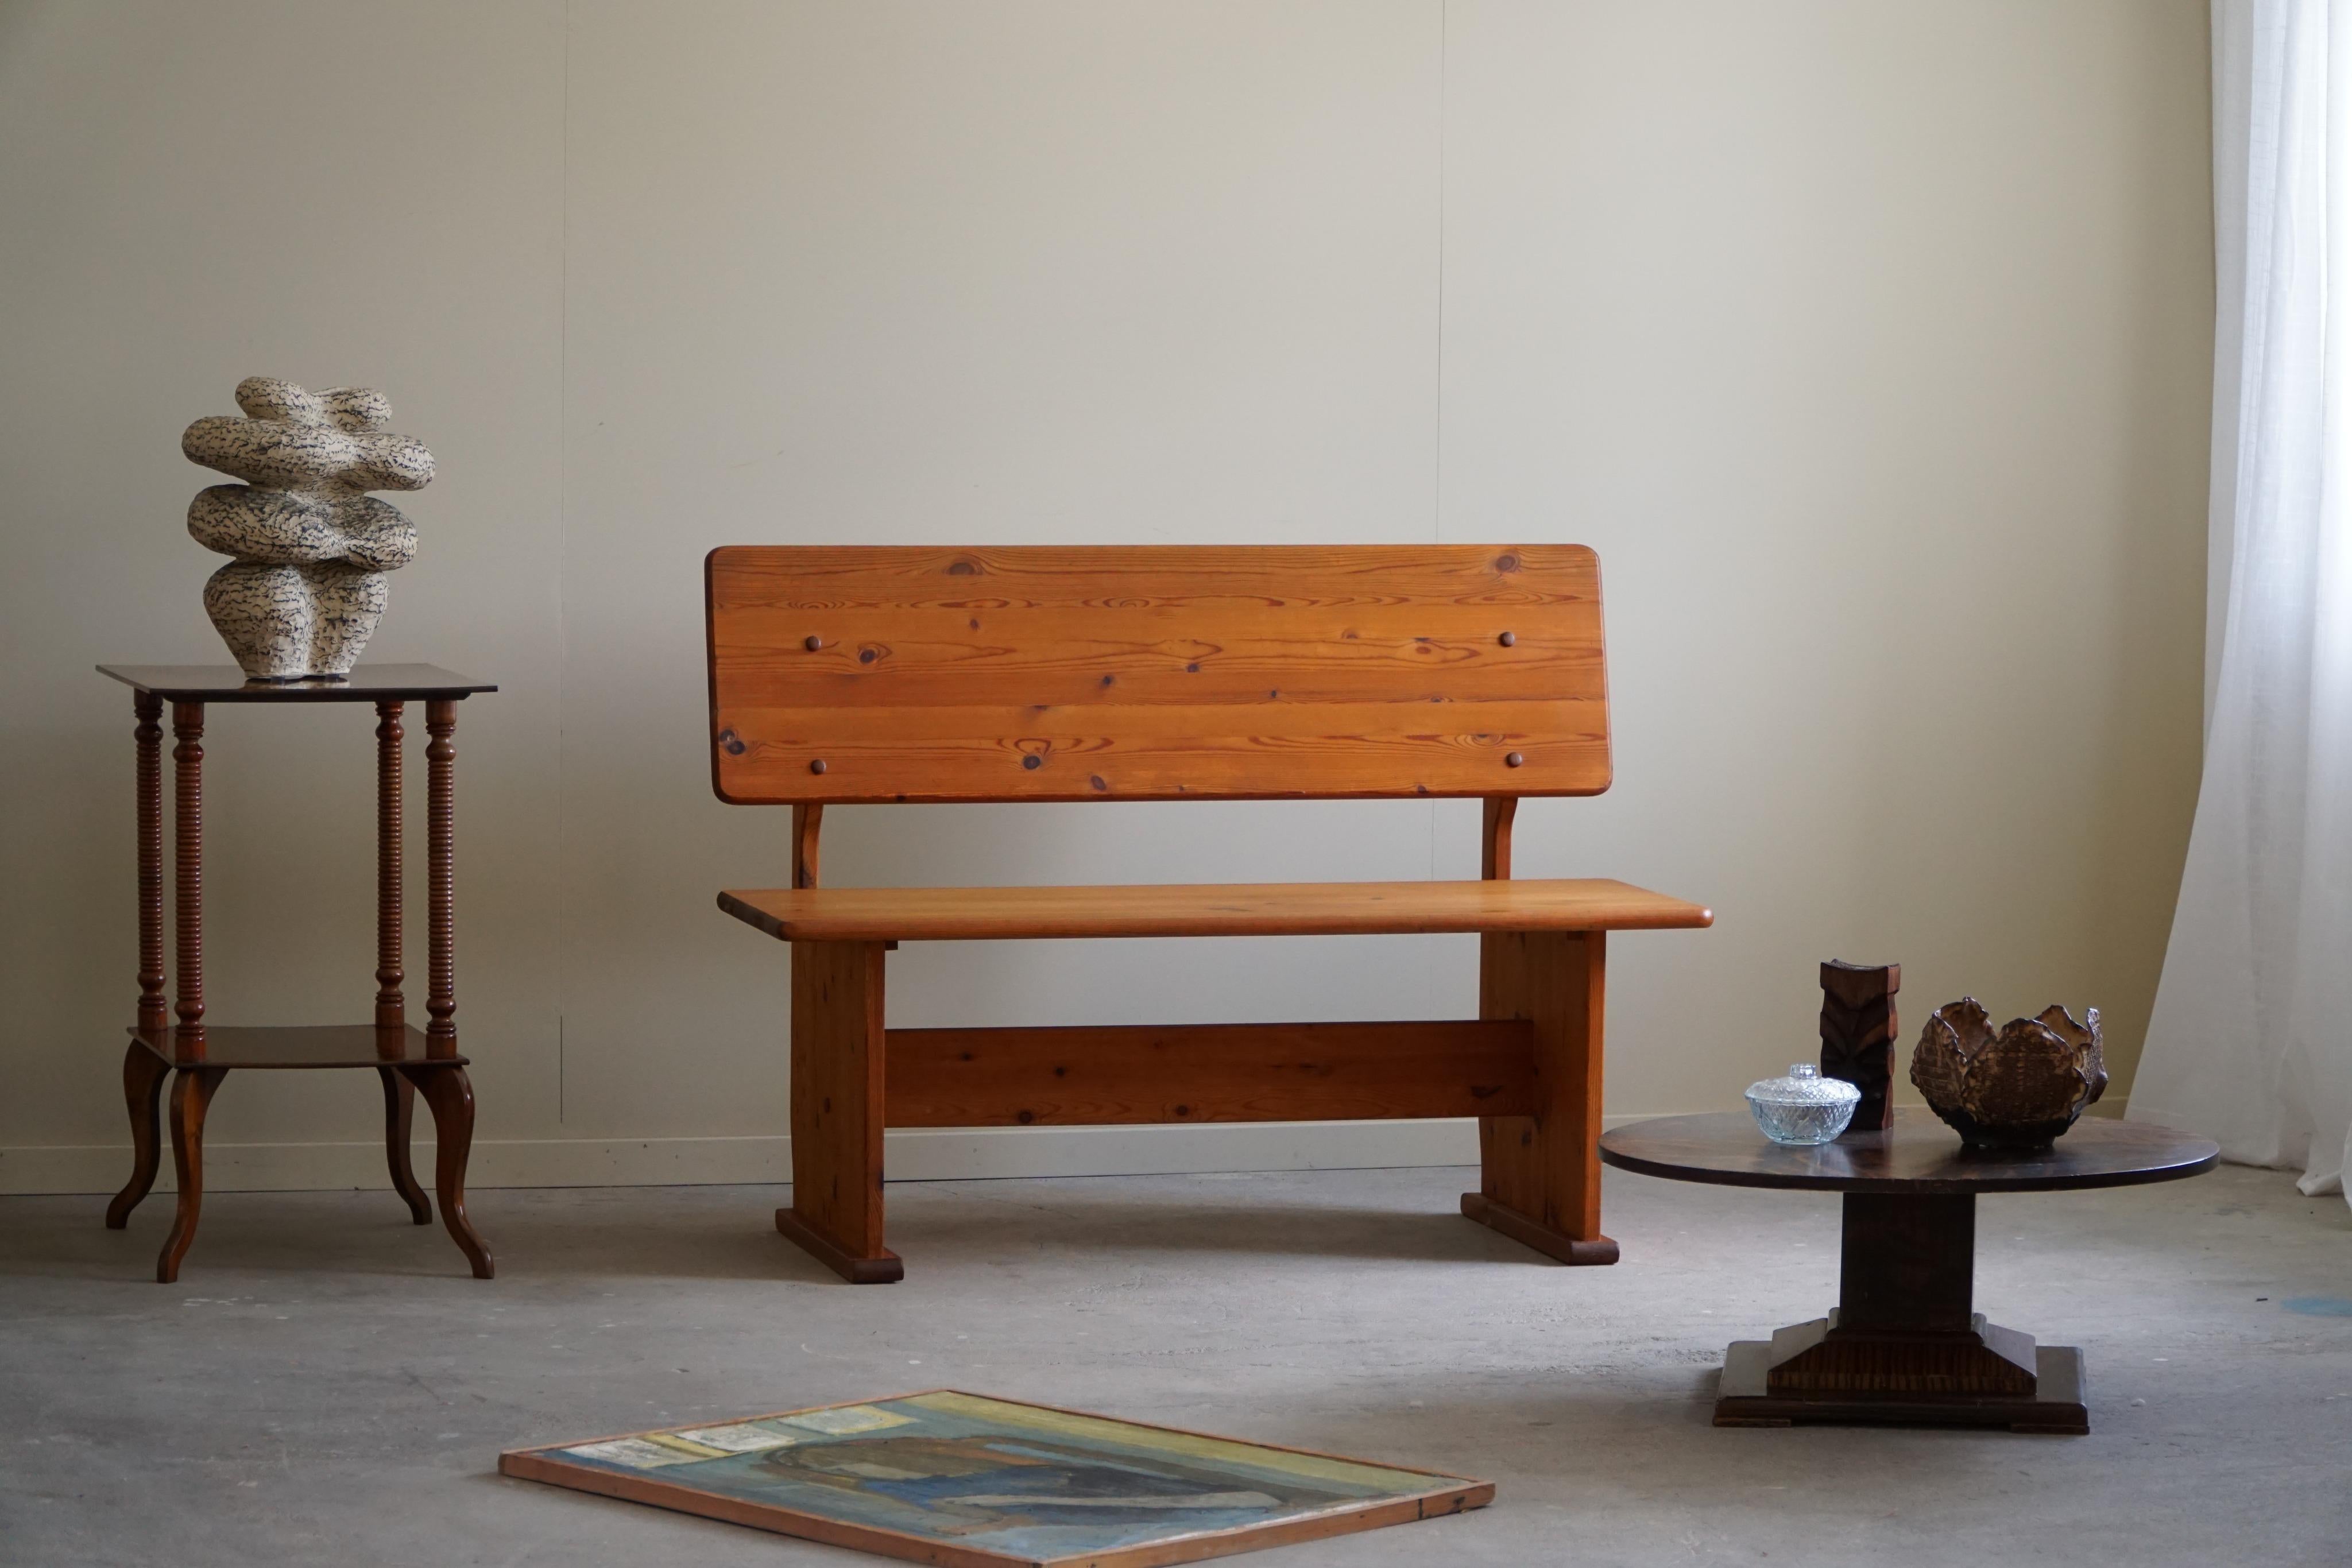 A charming bench in solid pine, crafted by a Swedish cabinetmaker in the 1970s.

Great craftmanship, perfectly suited for any interior style. A Modern, Scandinavian, Classic or an Art deco home decor.

A beautiful example and a great brutalist